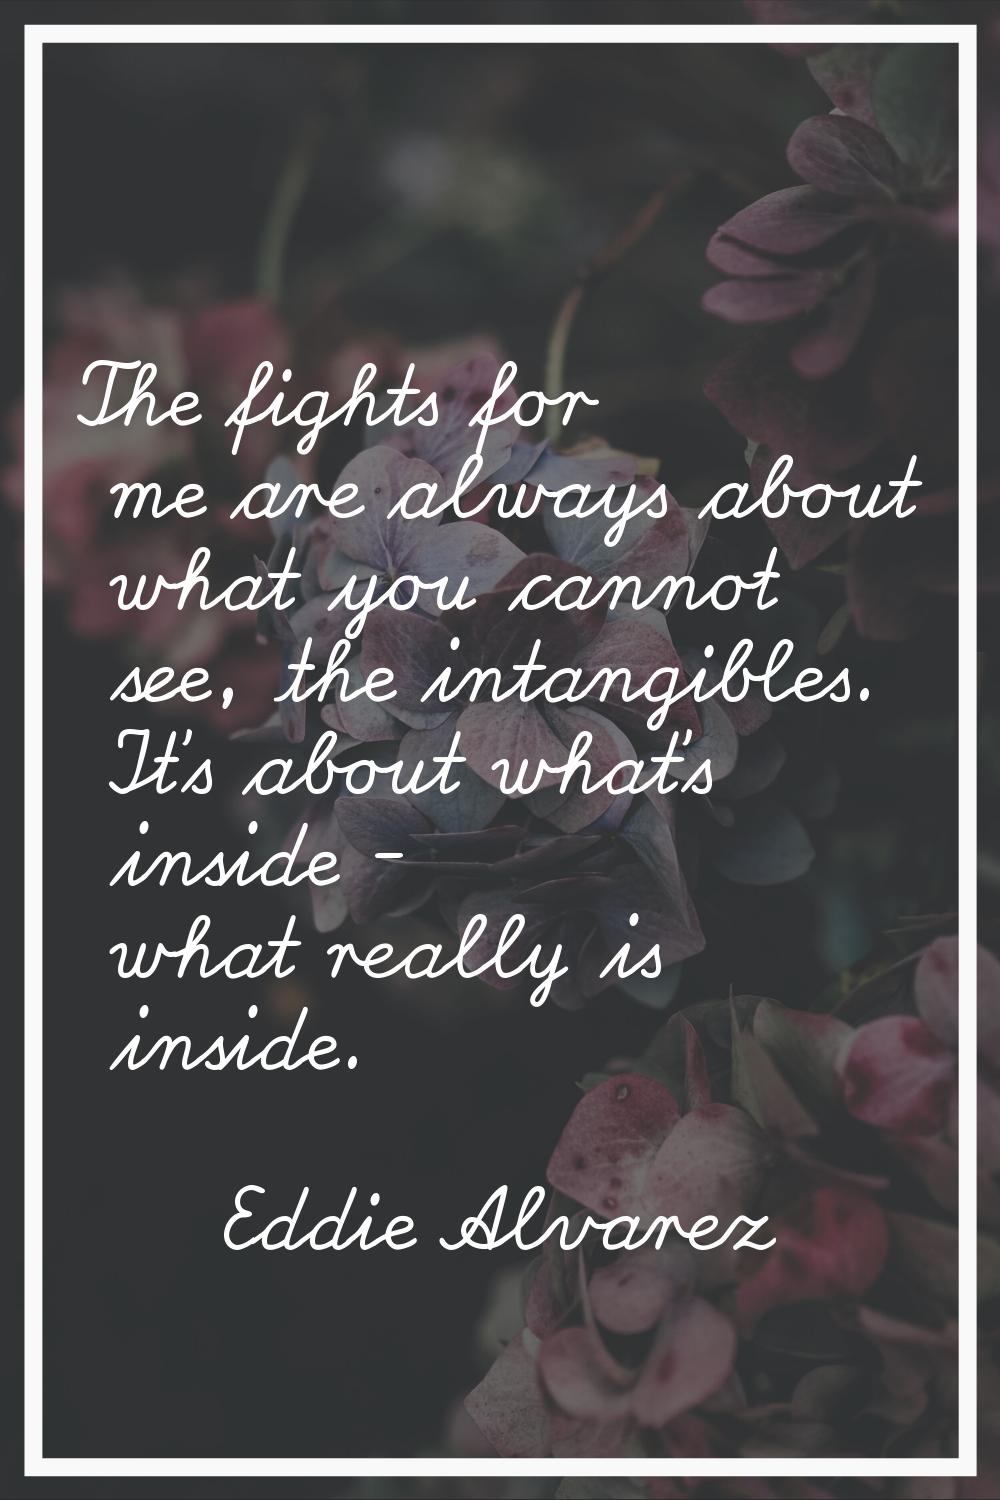 The fights for me are always about what you cannot see, the intangibles. It's about what's inside -